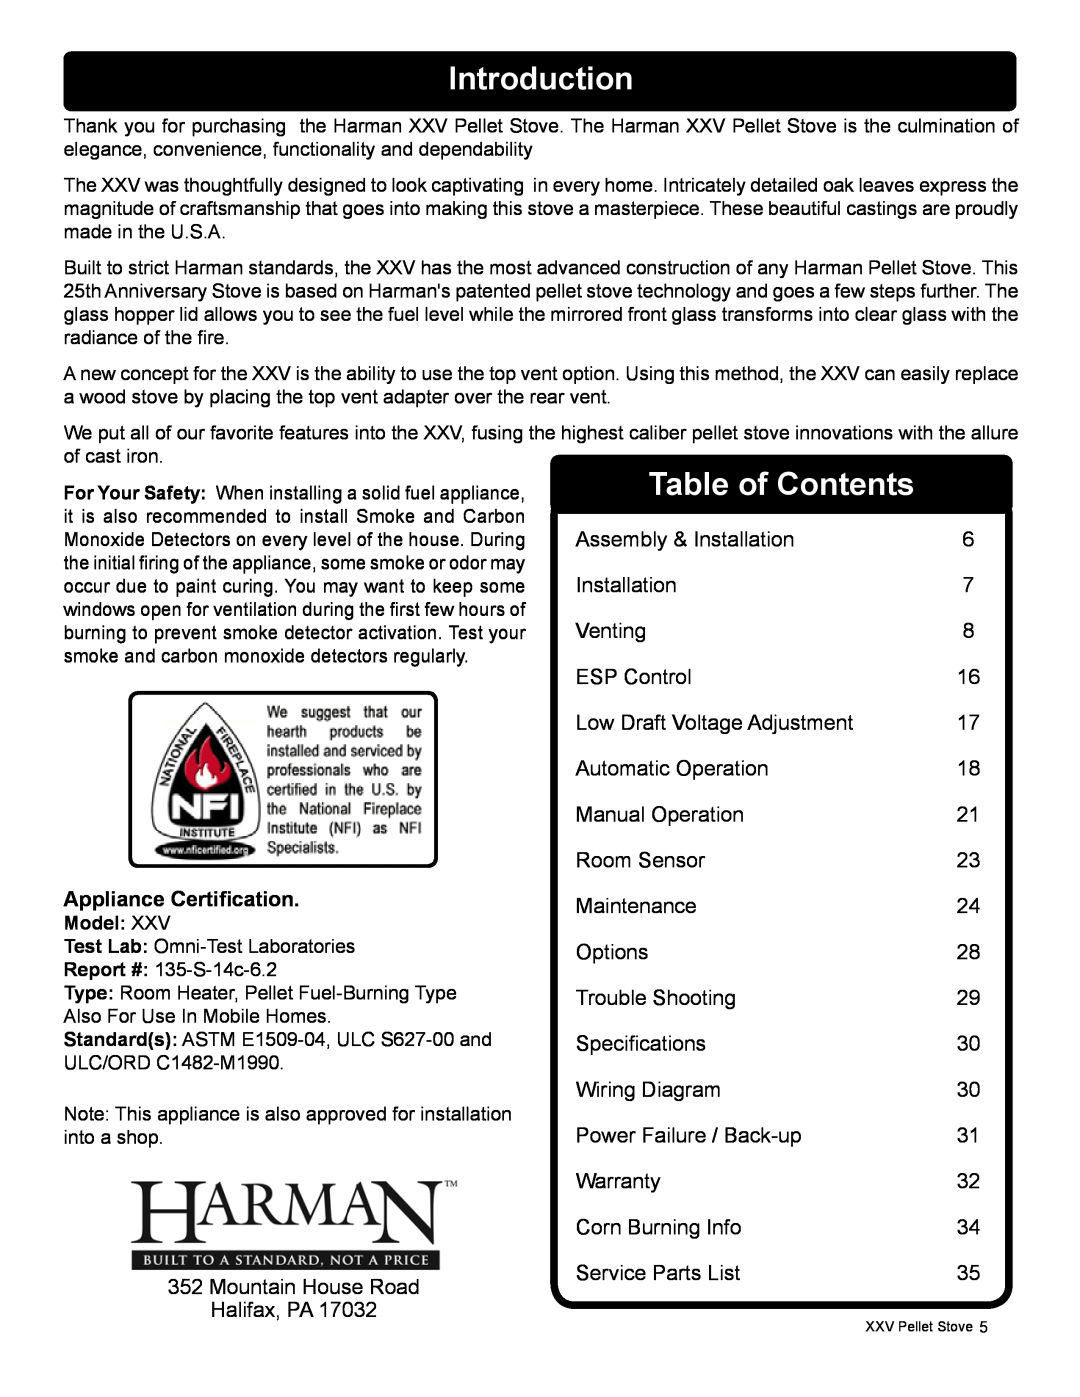 Harman Stove Company R16 manual Introduction, Appliance Certification 